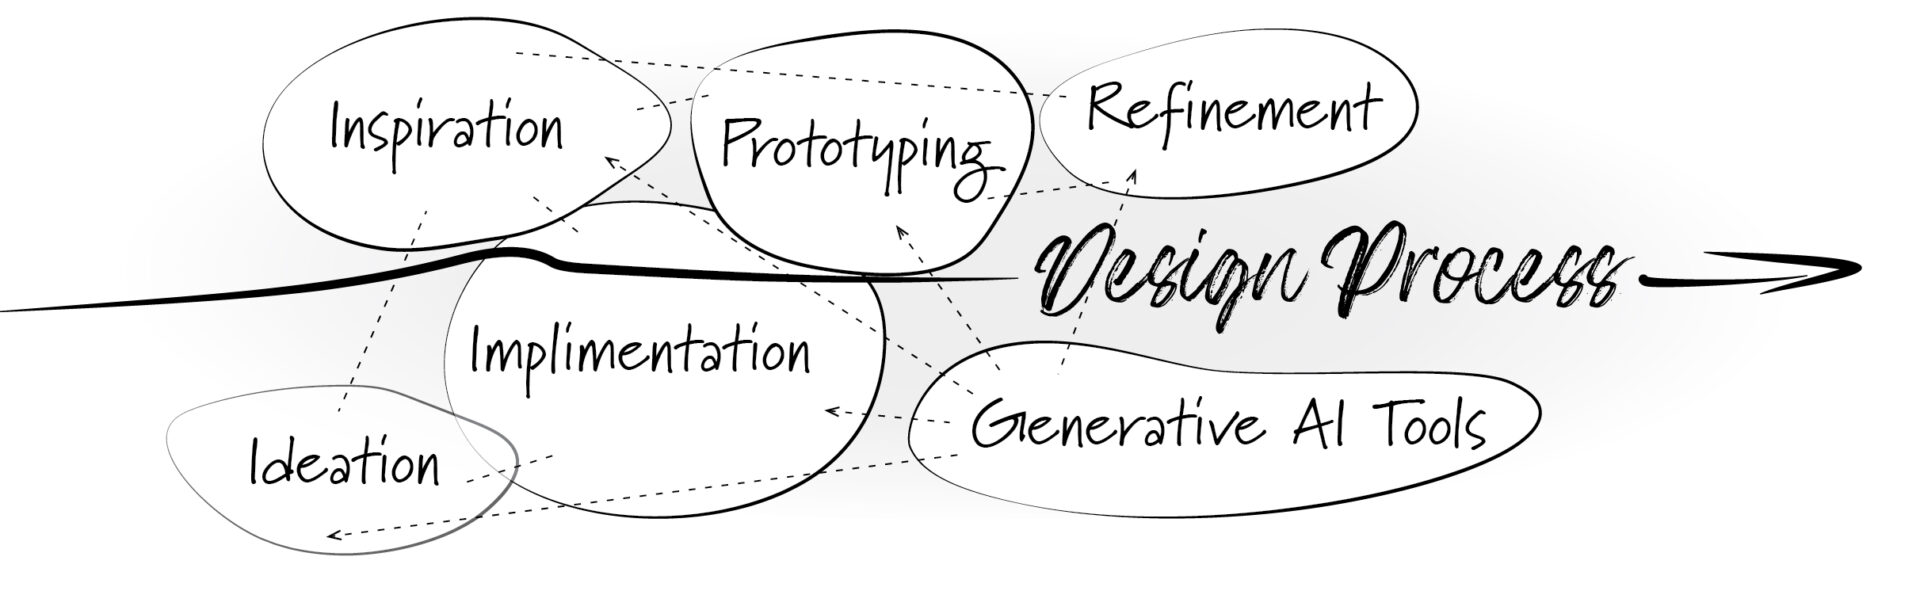 Figure 6. The concept of using generative AI tools in a design process (Credit: Sheng-Hung Lee)